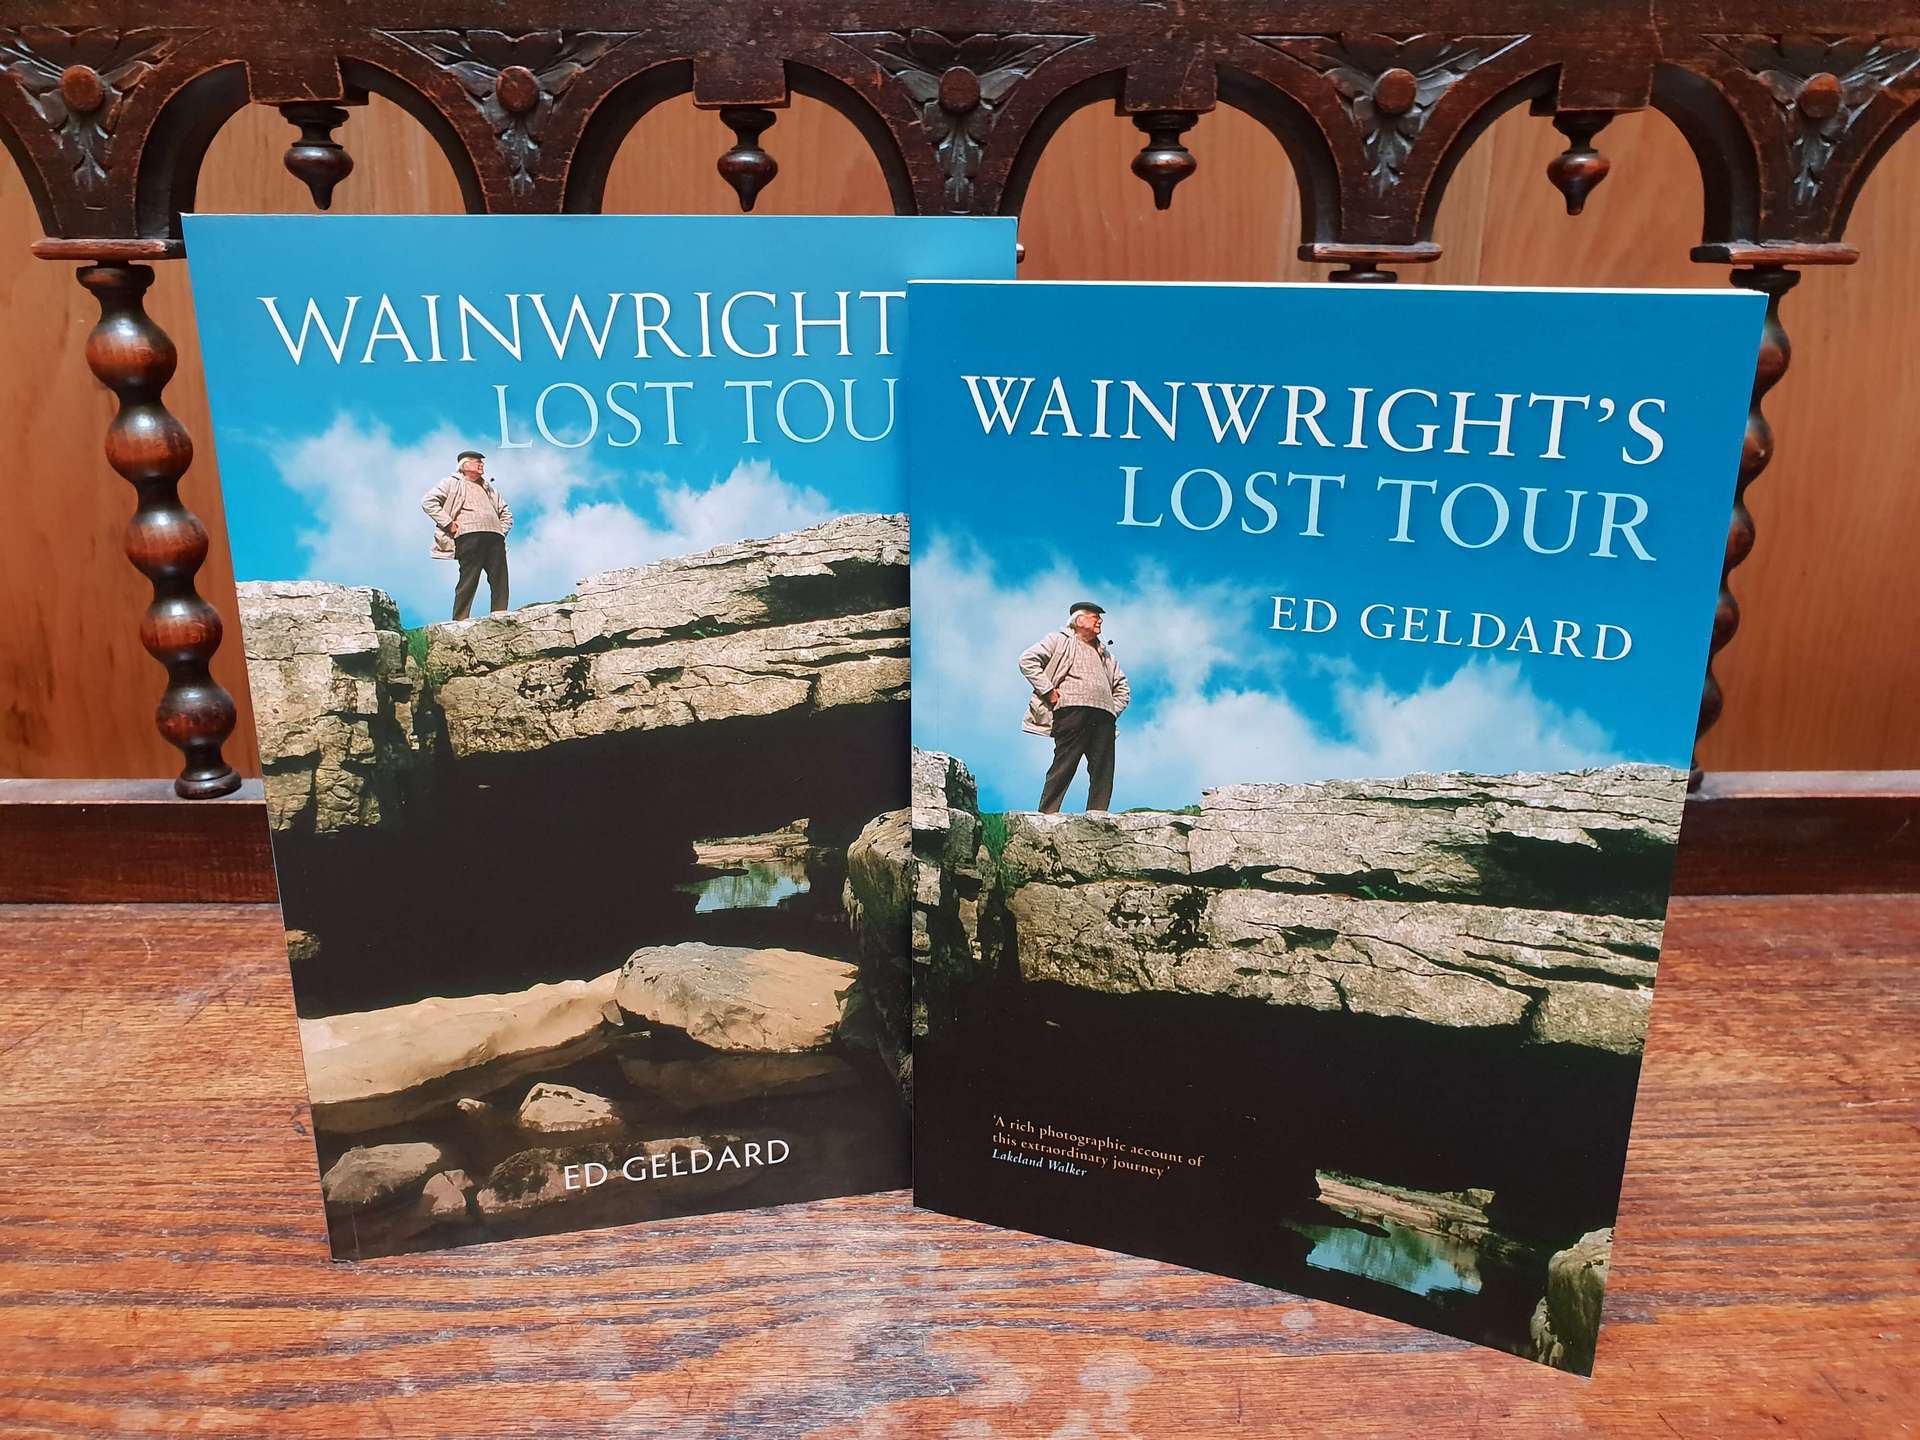 Wainwrights Tour in the Lake District